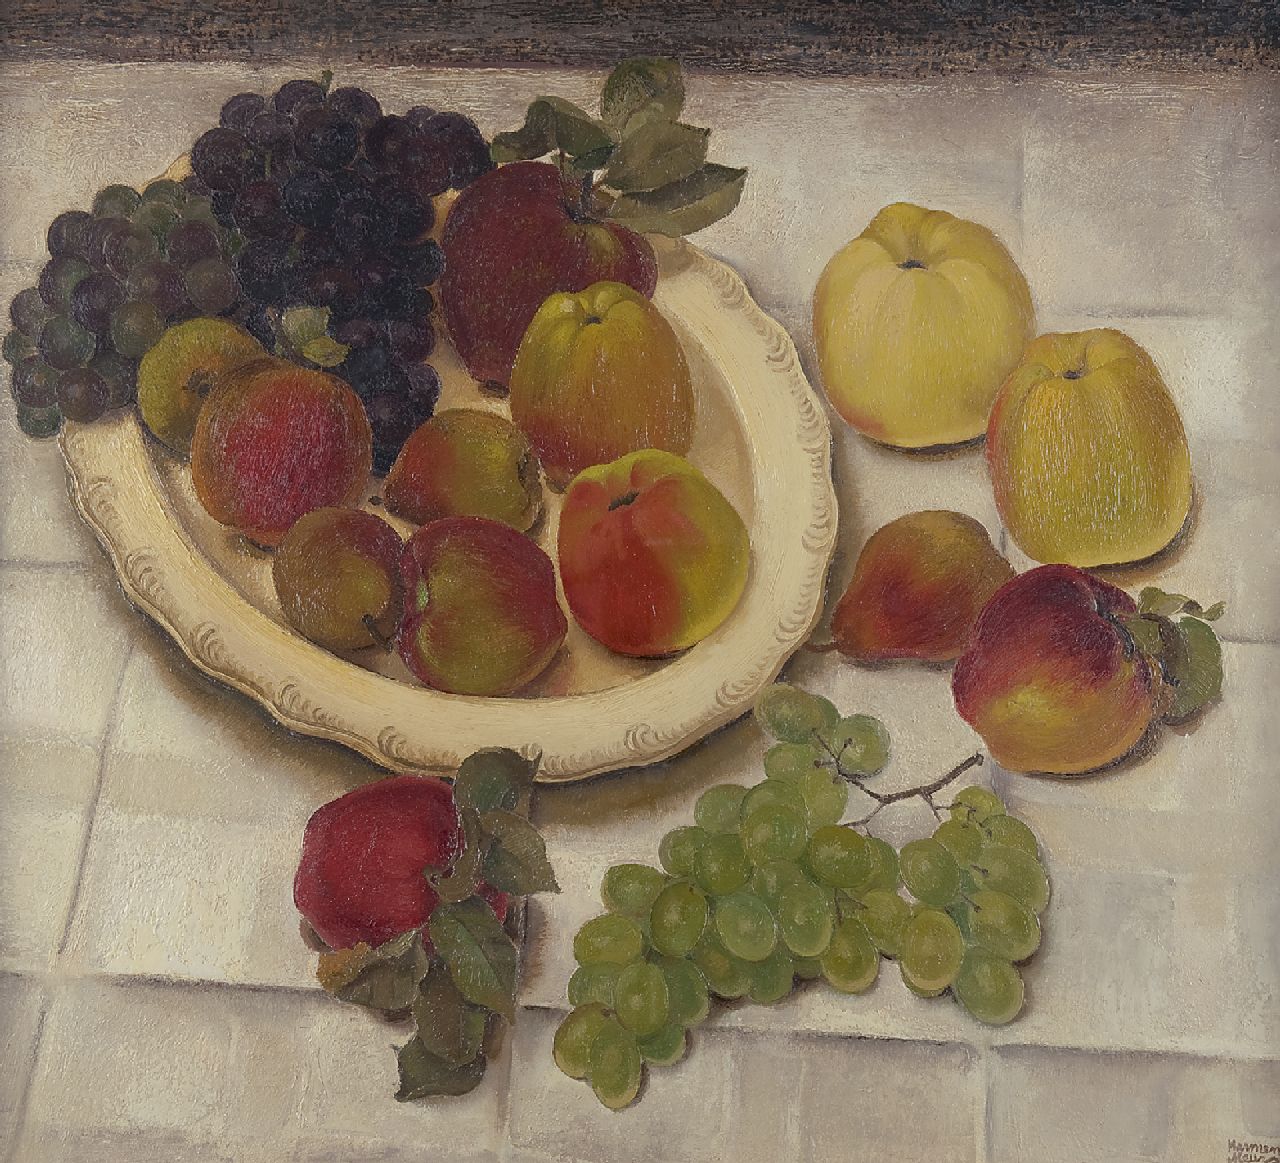 Meurs H.H.  | 'Harmen' Hermanus Meurs | Paintings offered for sale | A still life with grapes and apples, oil on canvas 65.1 x 73.2 cm, signed l.r. and on the reverse and dated 1932